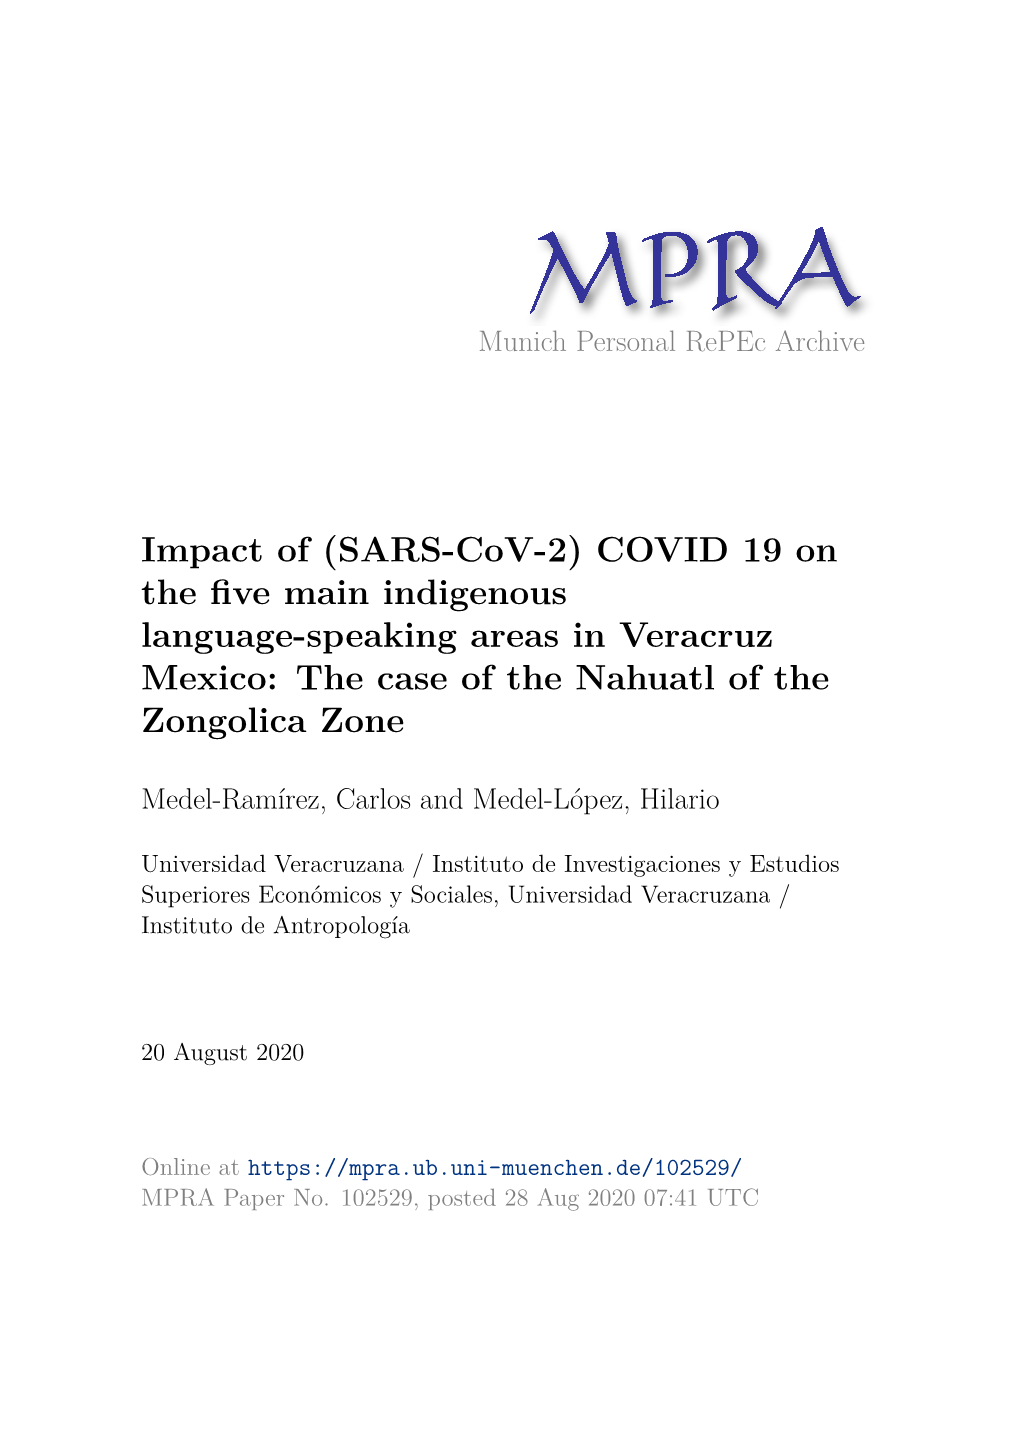 (SARS-Cov-2) COVID 19 on the Five Main Indigenous Language- Speaking Areas in Veracruz Mexico: the Case of the Nahuatl of the Zongolica Zone